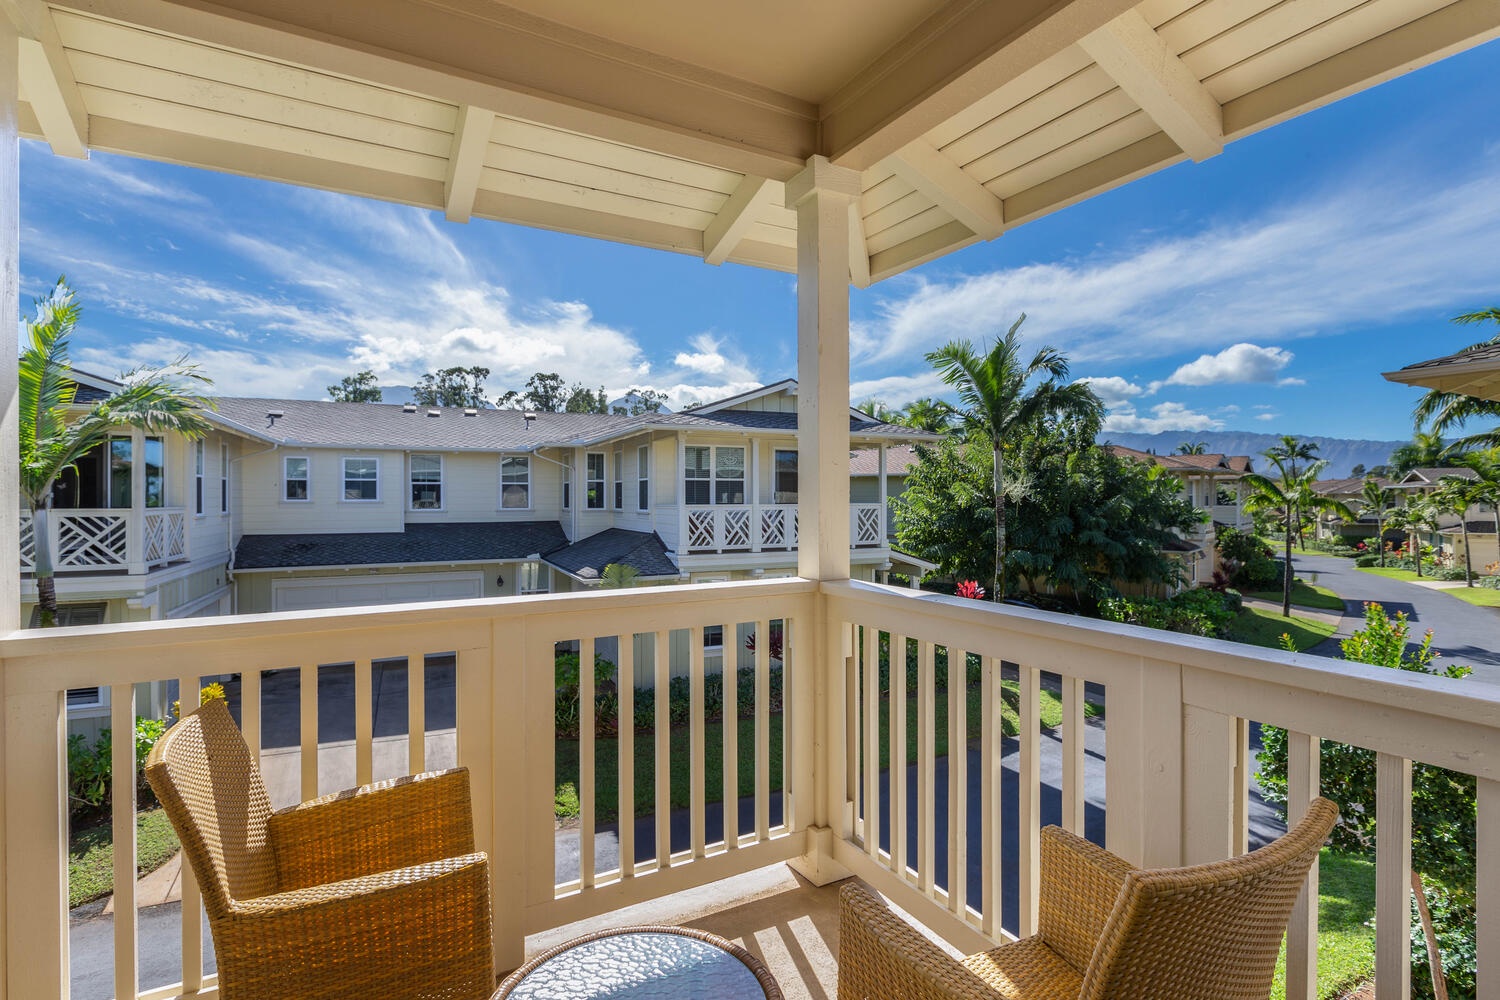 Princeville Vacation Rentals, Villa Nalani - Claim your share of aloha from the privacy of this luxury, 2-story townhome residing in one of North Shore Kauai’s newest resort communities, Nihilani Resort